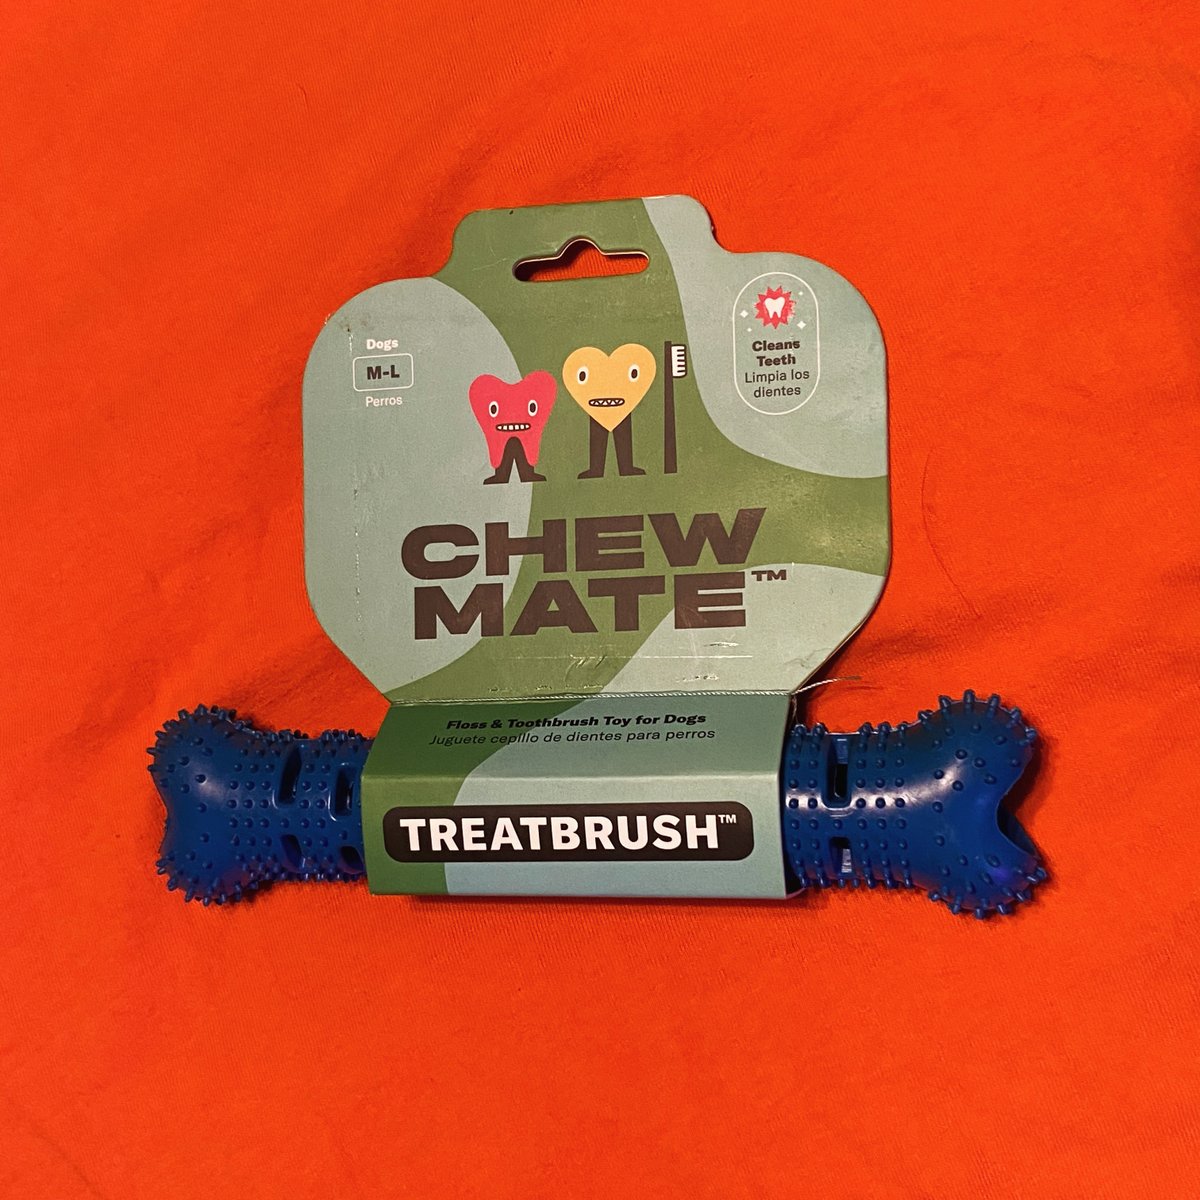 Canine dental disease causes needless pain & misery because it's almost completely preventable with good oral hygiene. That's why a ChewMate TreatBrush, which combines a toothbrush, floss, treat & toy, is week's #FreebieFriday giveaway prize. Visit Pet Age on IG for FF details!